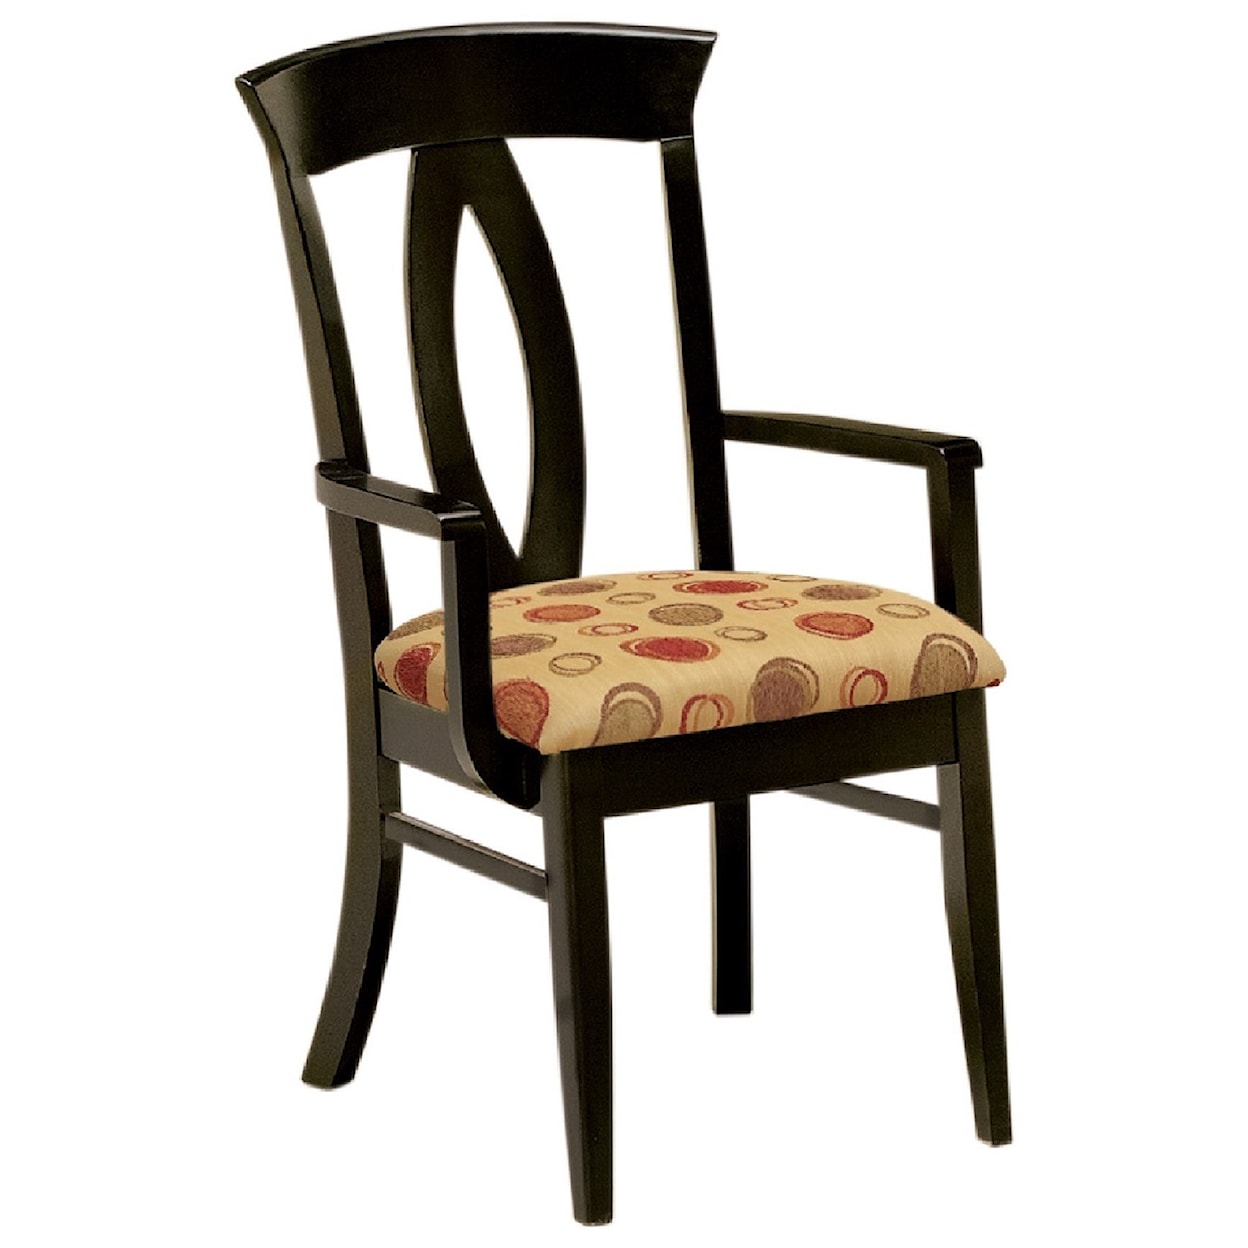 F&N Woodworking Brookfield Arm Chair - Fabric Seat